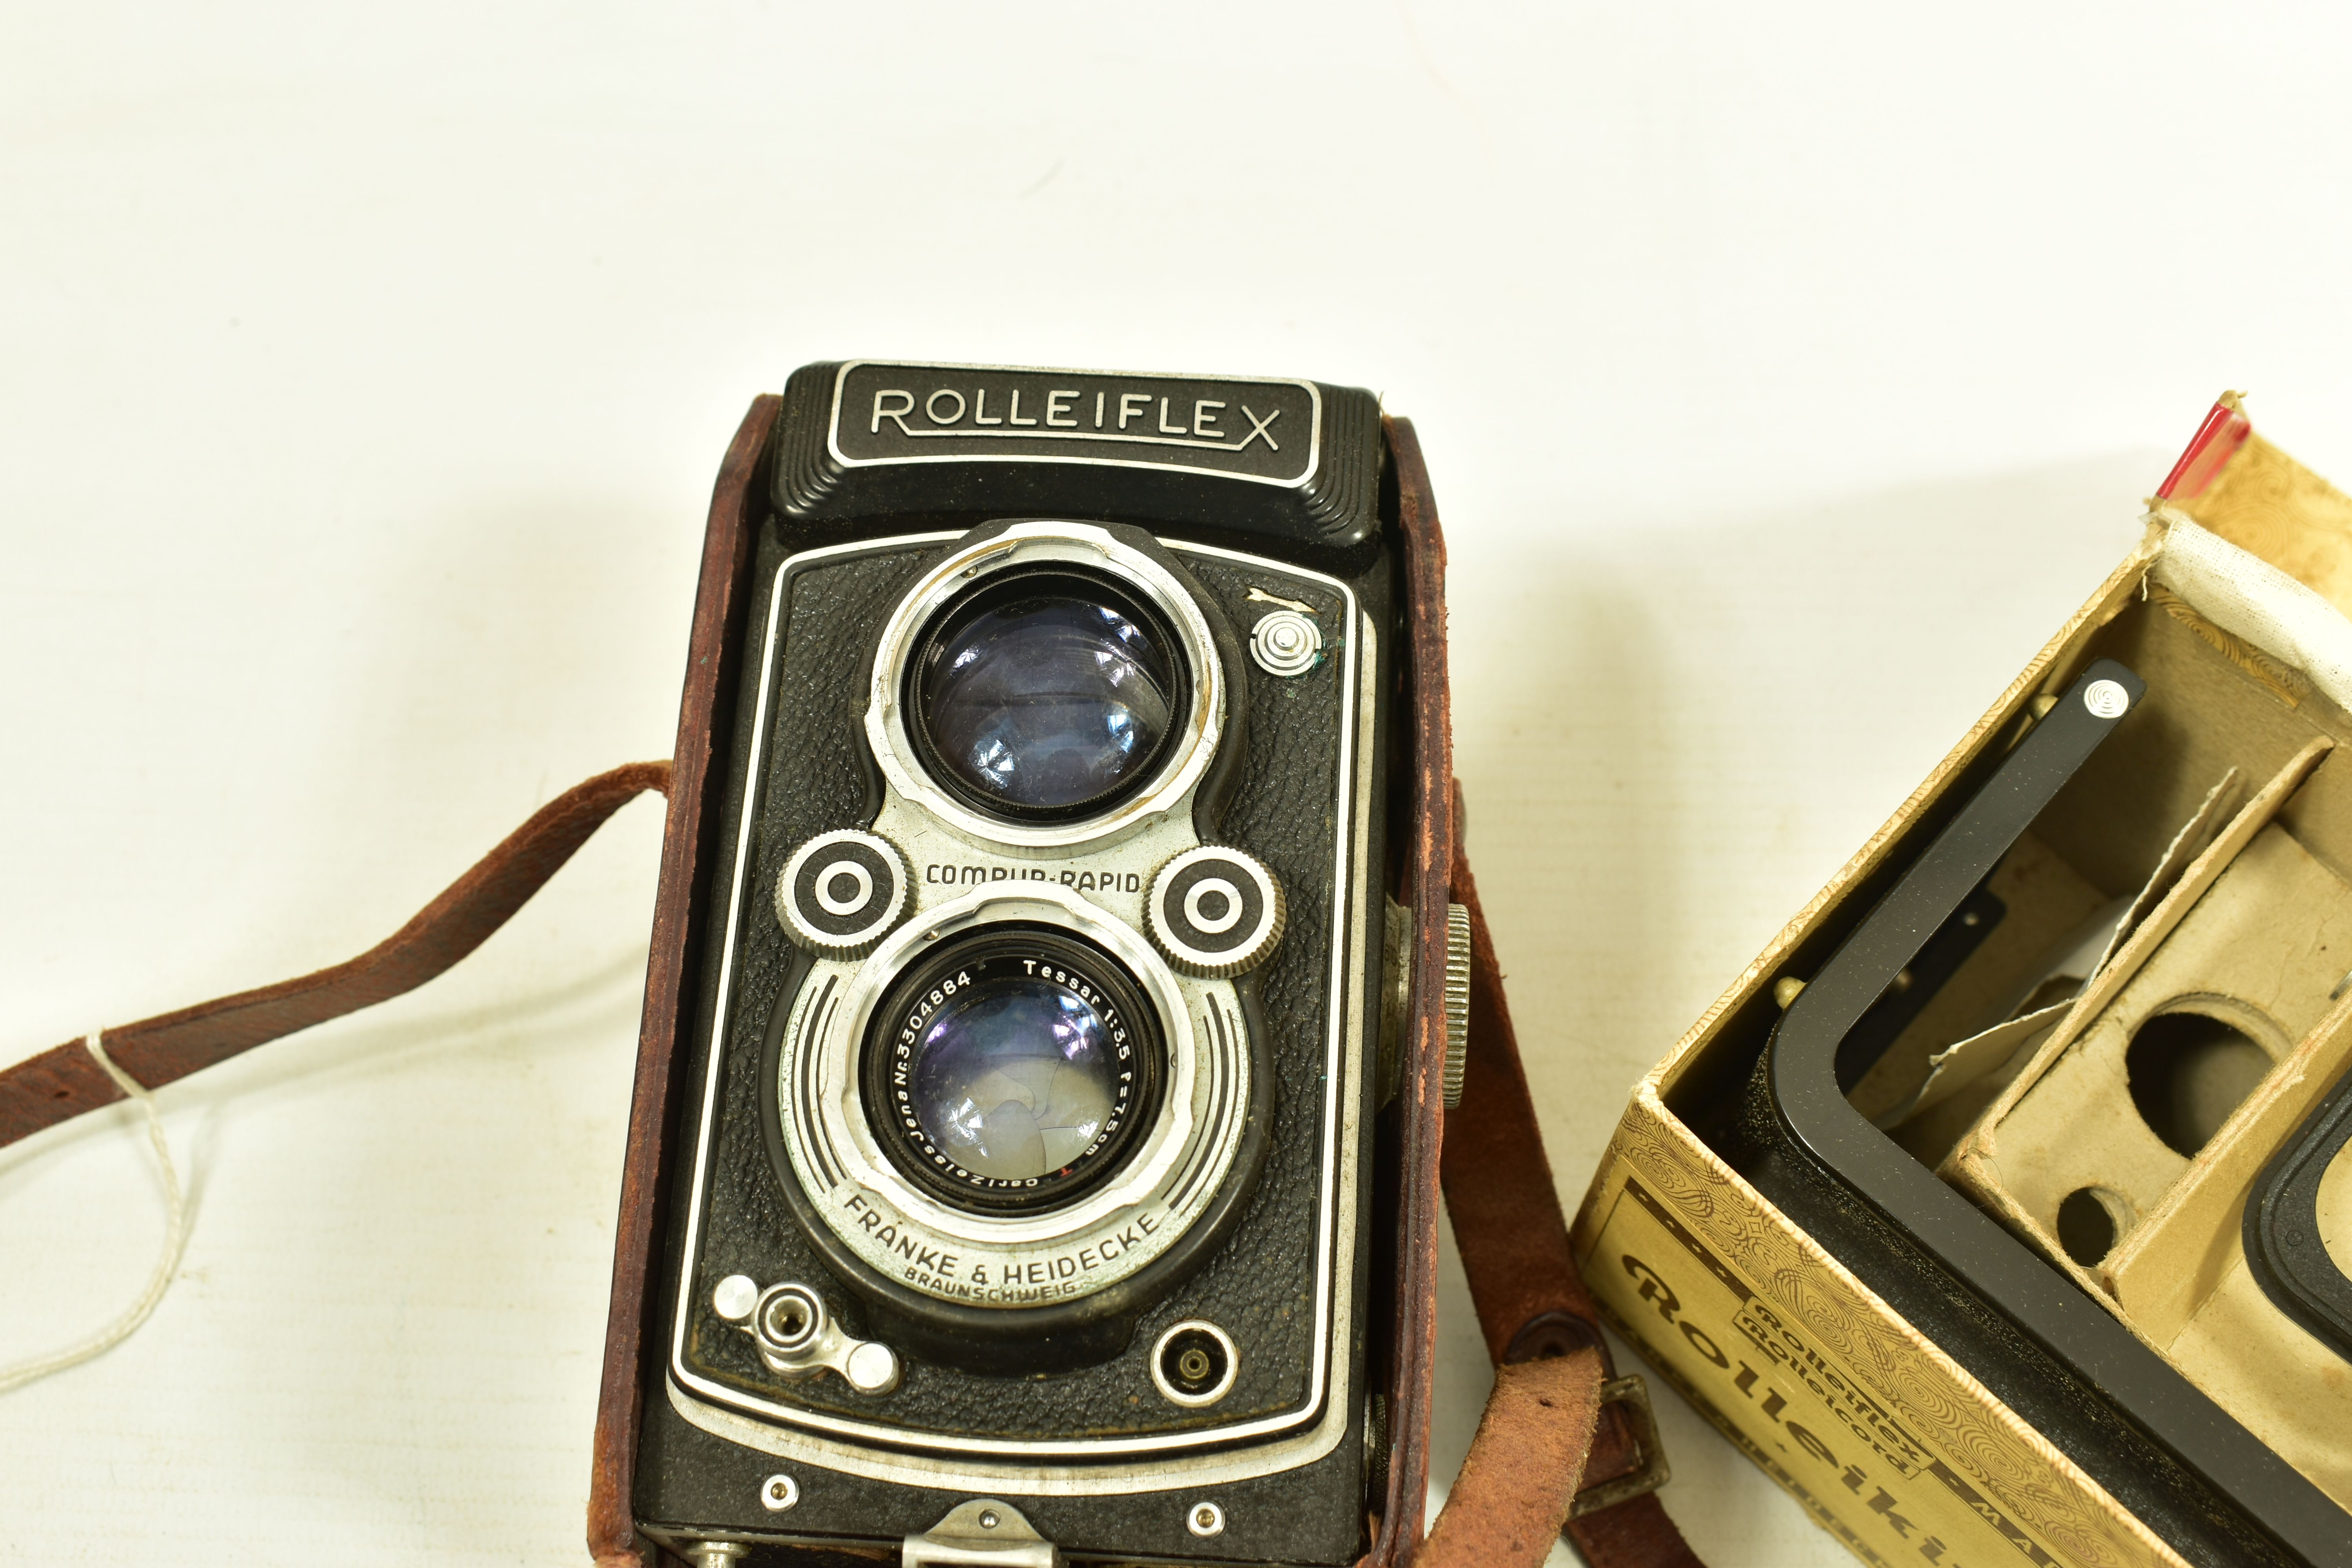 A ROLLEIFLEX AUTOMAT 6X6 K4 50 TLR CAMERA Serial No 1166151 fitted with Tessar 7.5cm f 3.5 with a - Image 2 of 5